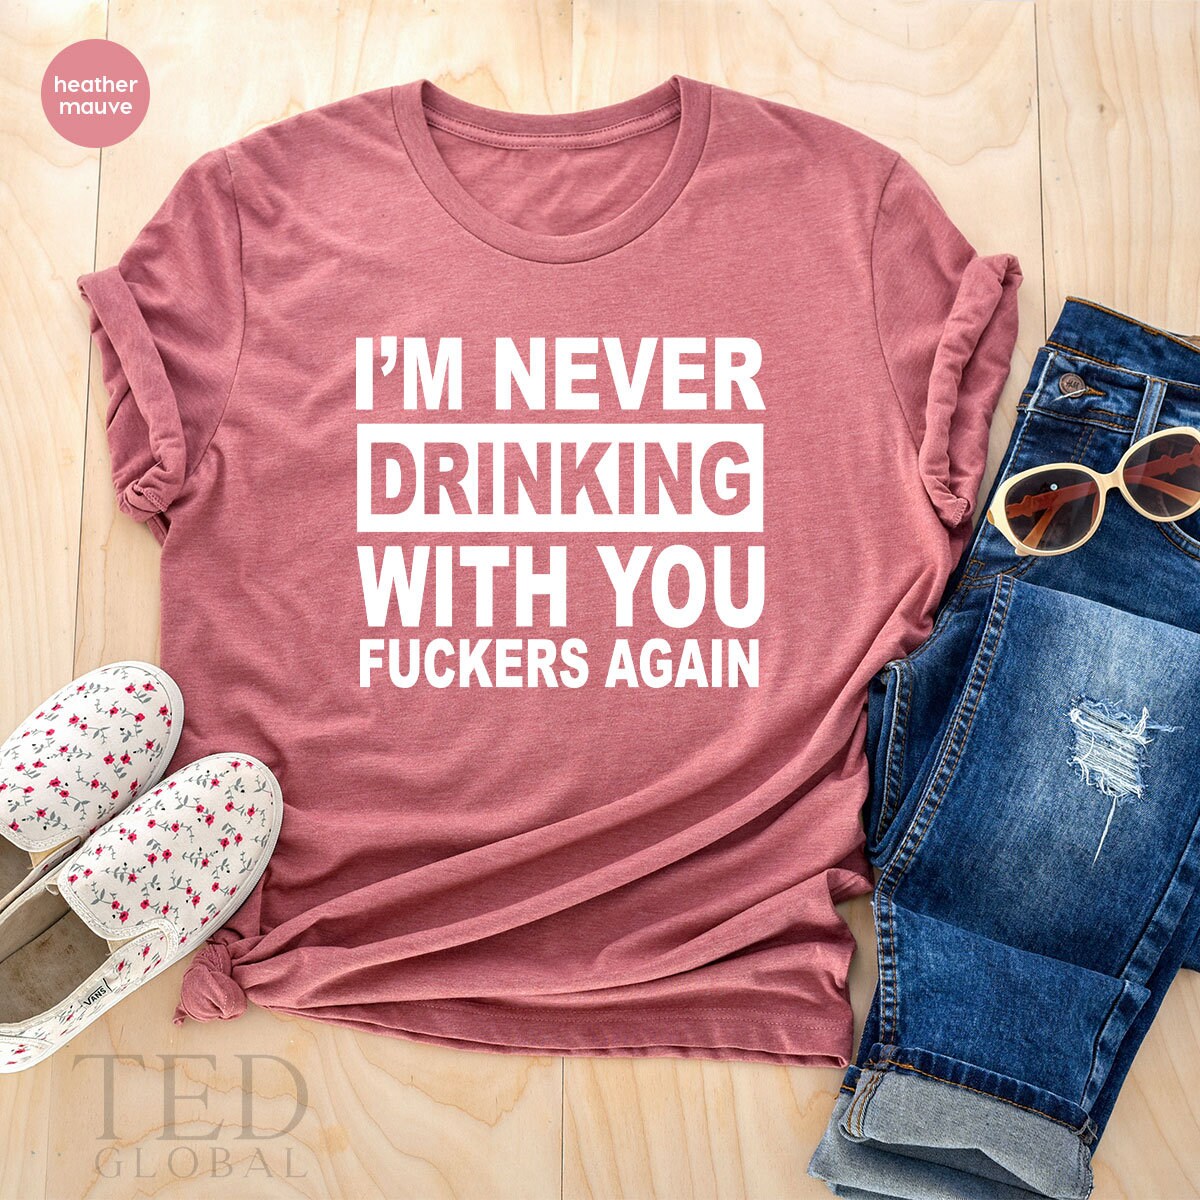 Funny Drinking TShirt, Drinker T Shirt, Drinking Buddies Gift, Drunk Humor Shirt, Best Friends, Never Drinking With You Fucker, Humorous Tee - Fastdeliverytees.com